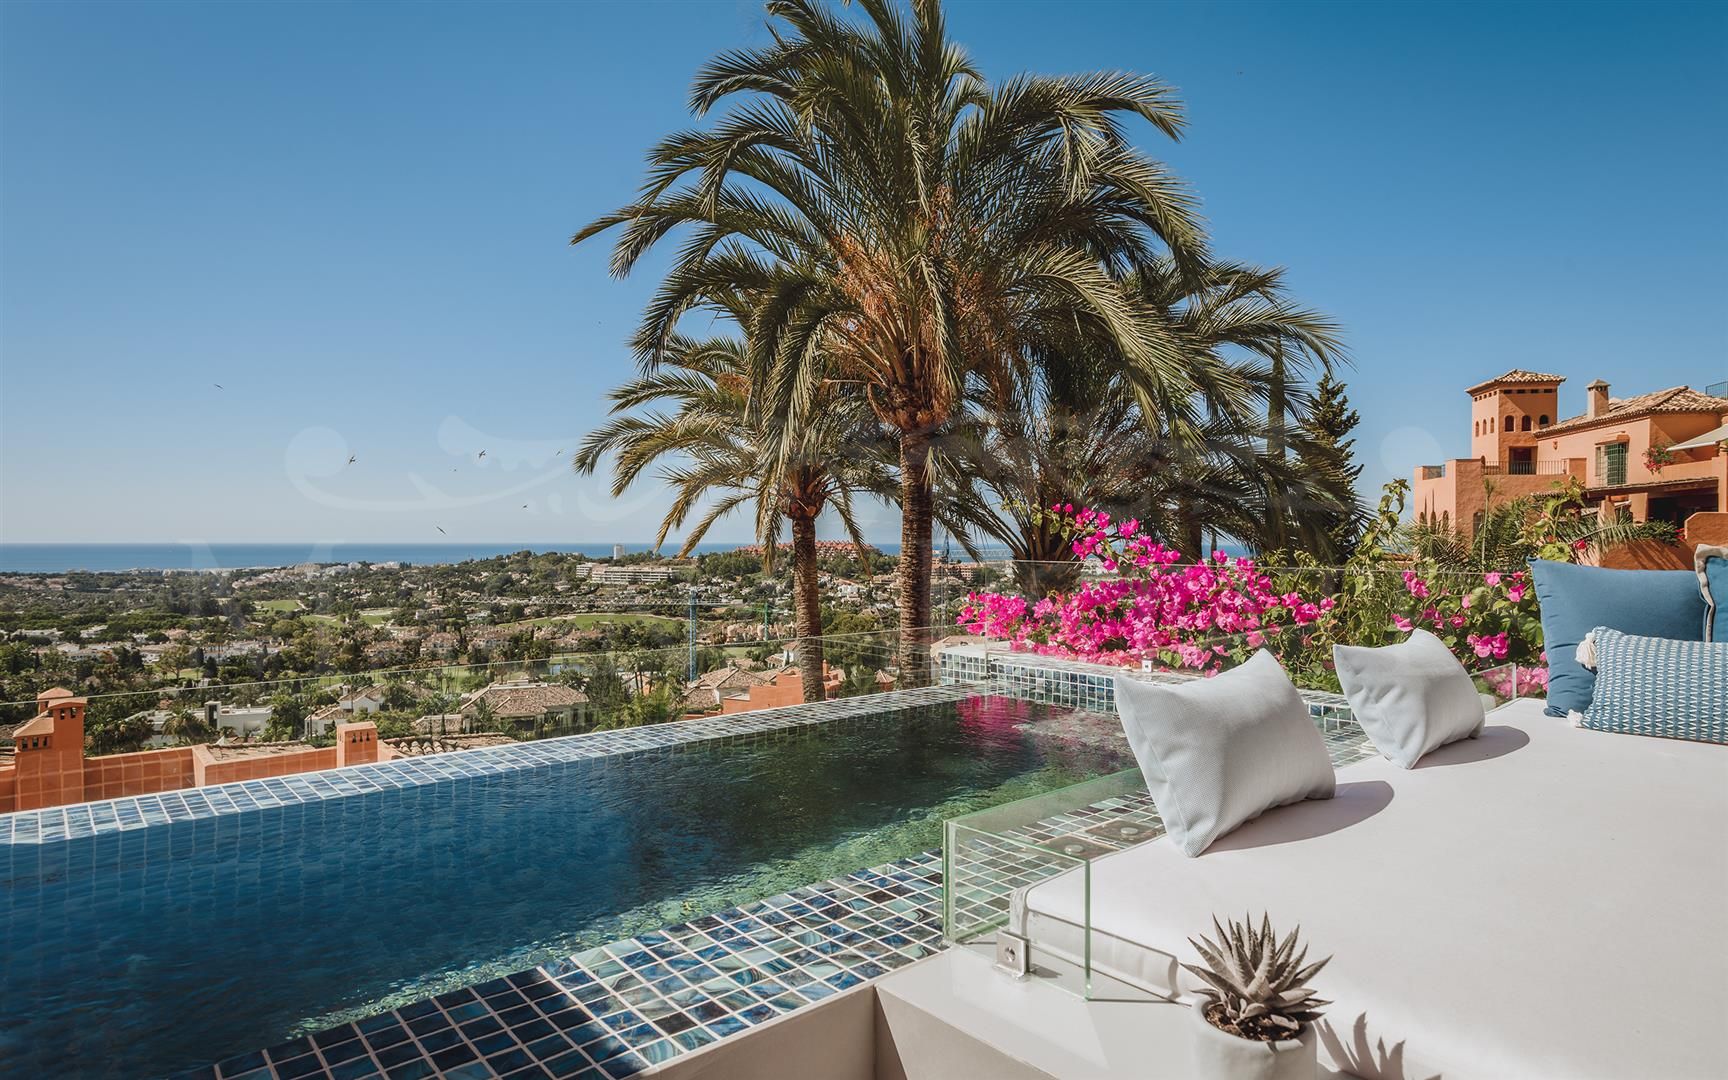 Duplex penthouse in Les Belvederes with open views to the sea, in Nueva Andalucia, Marbella